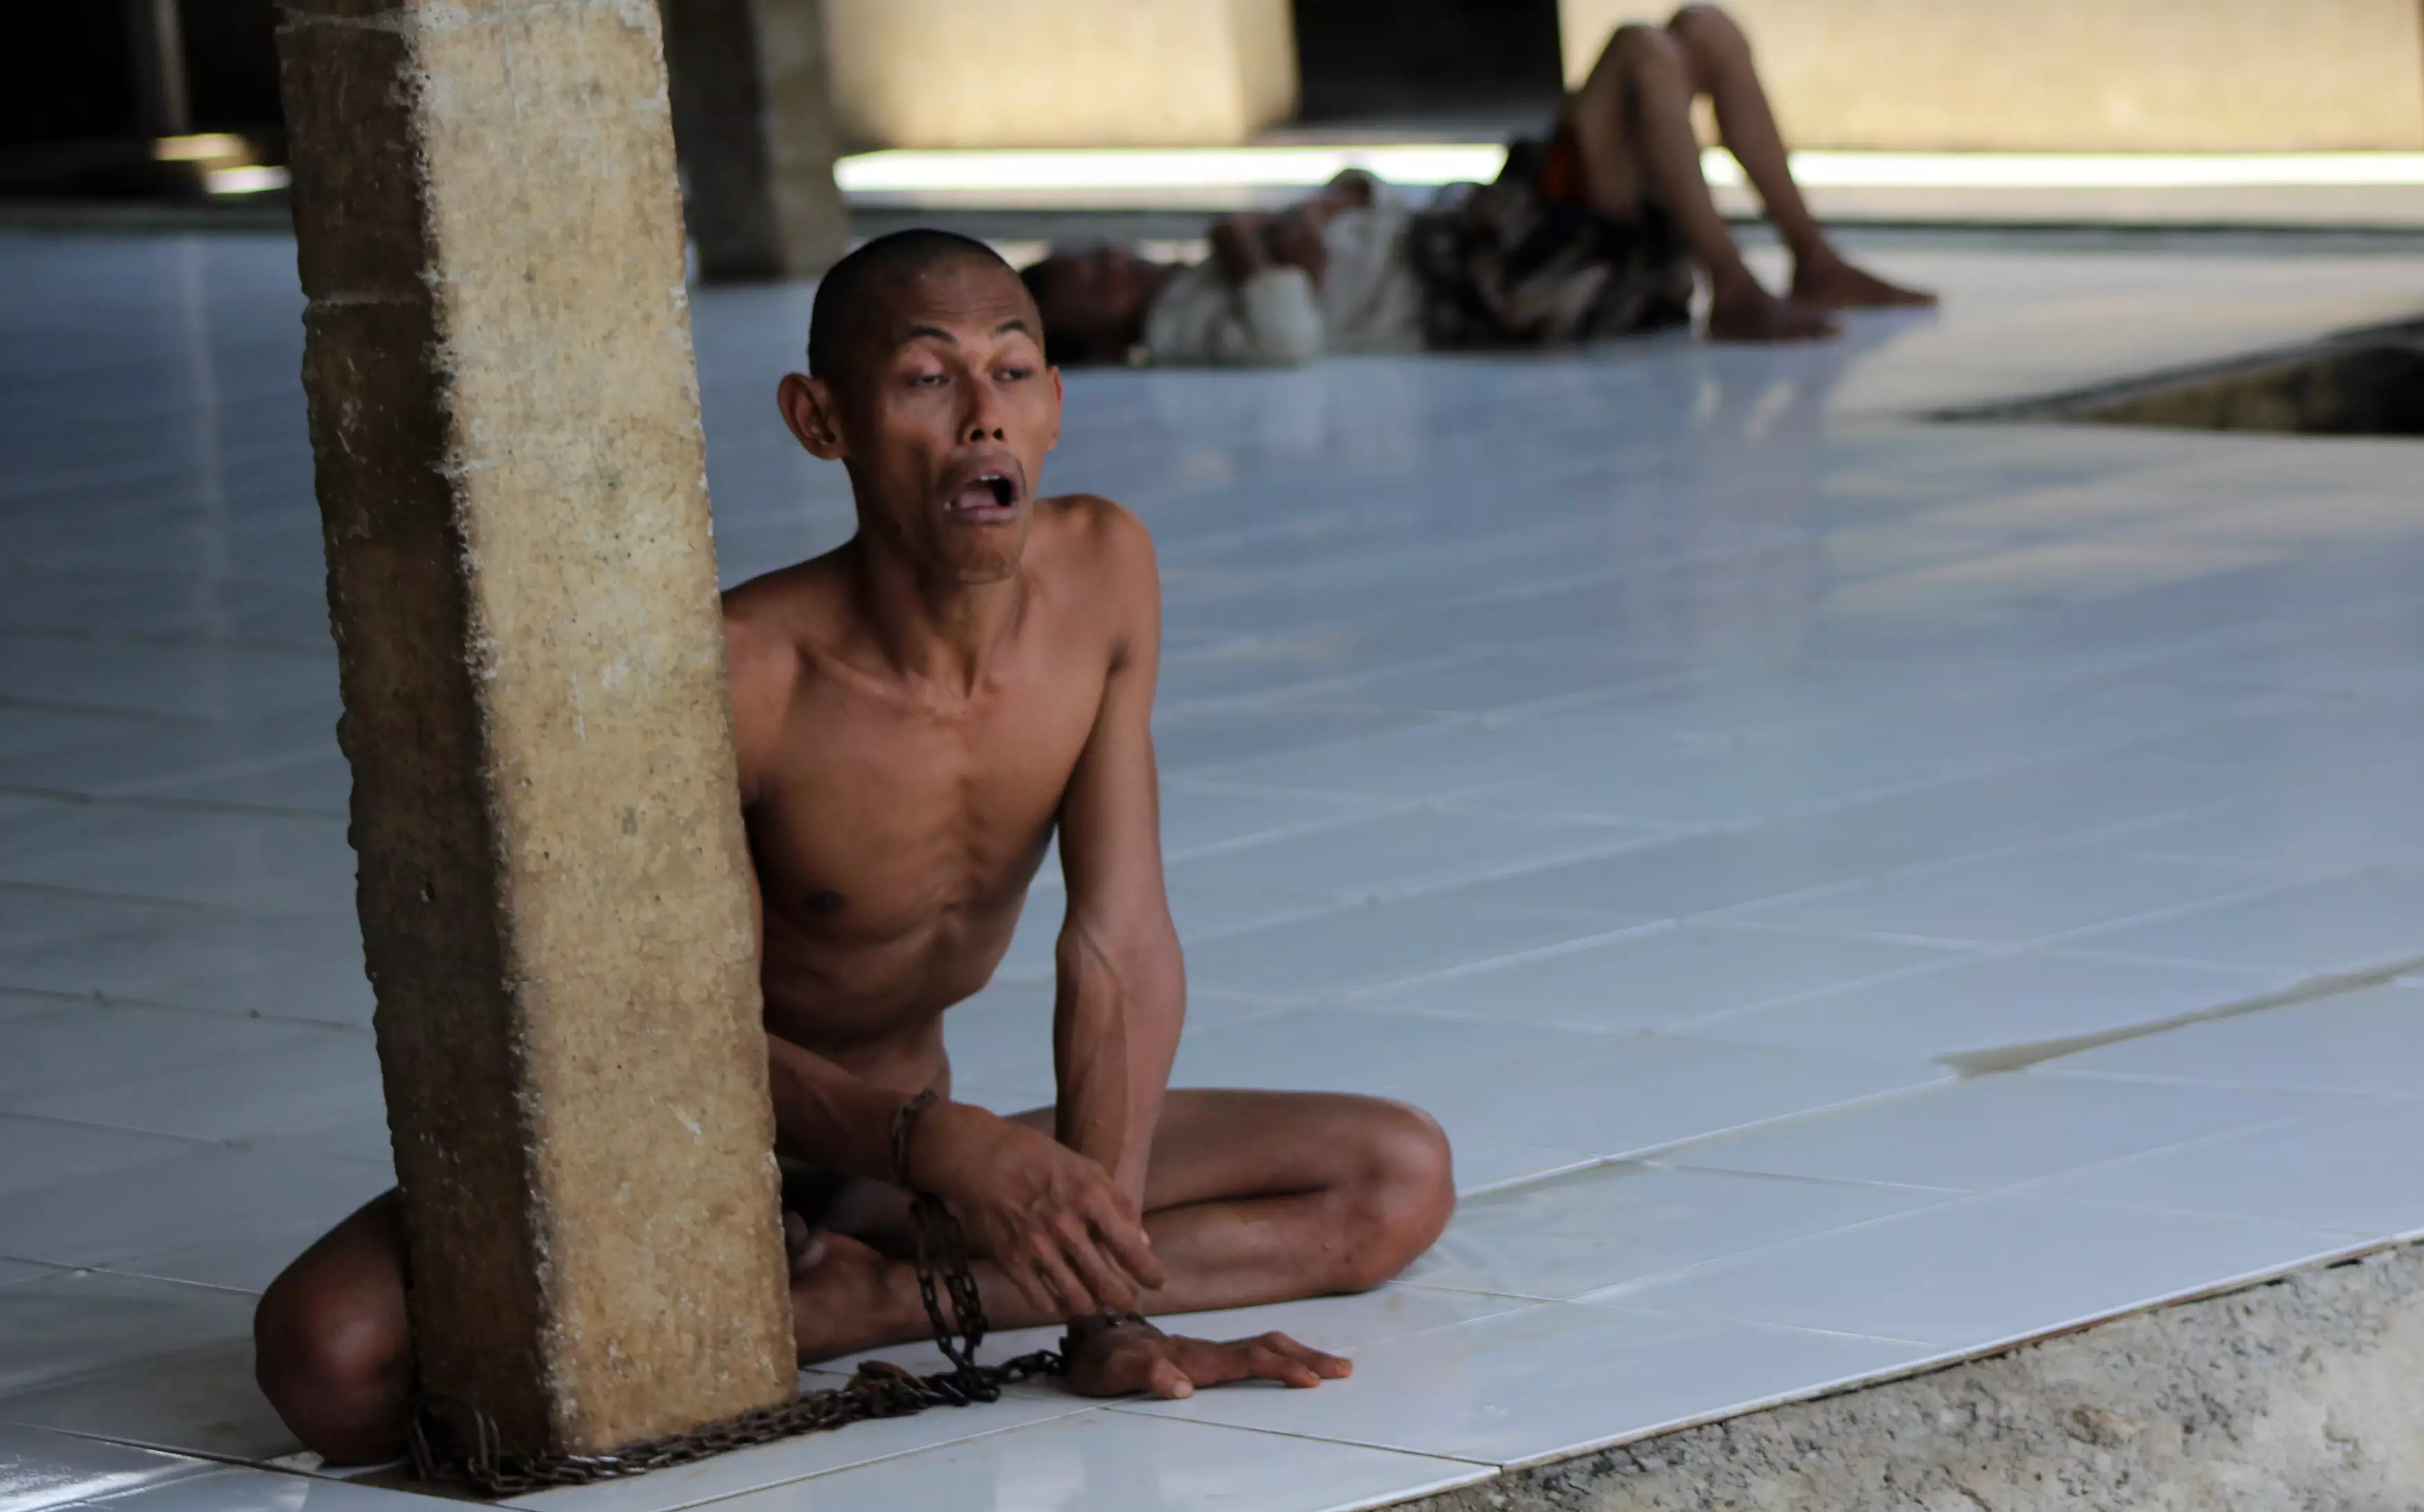 Harrowing Images Reveal What Life Is Like Inside Indonesian Mental Asylums